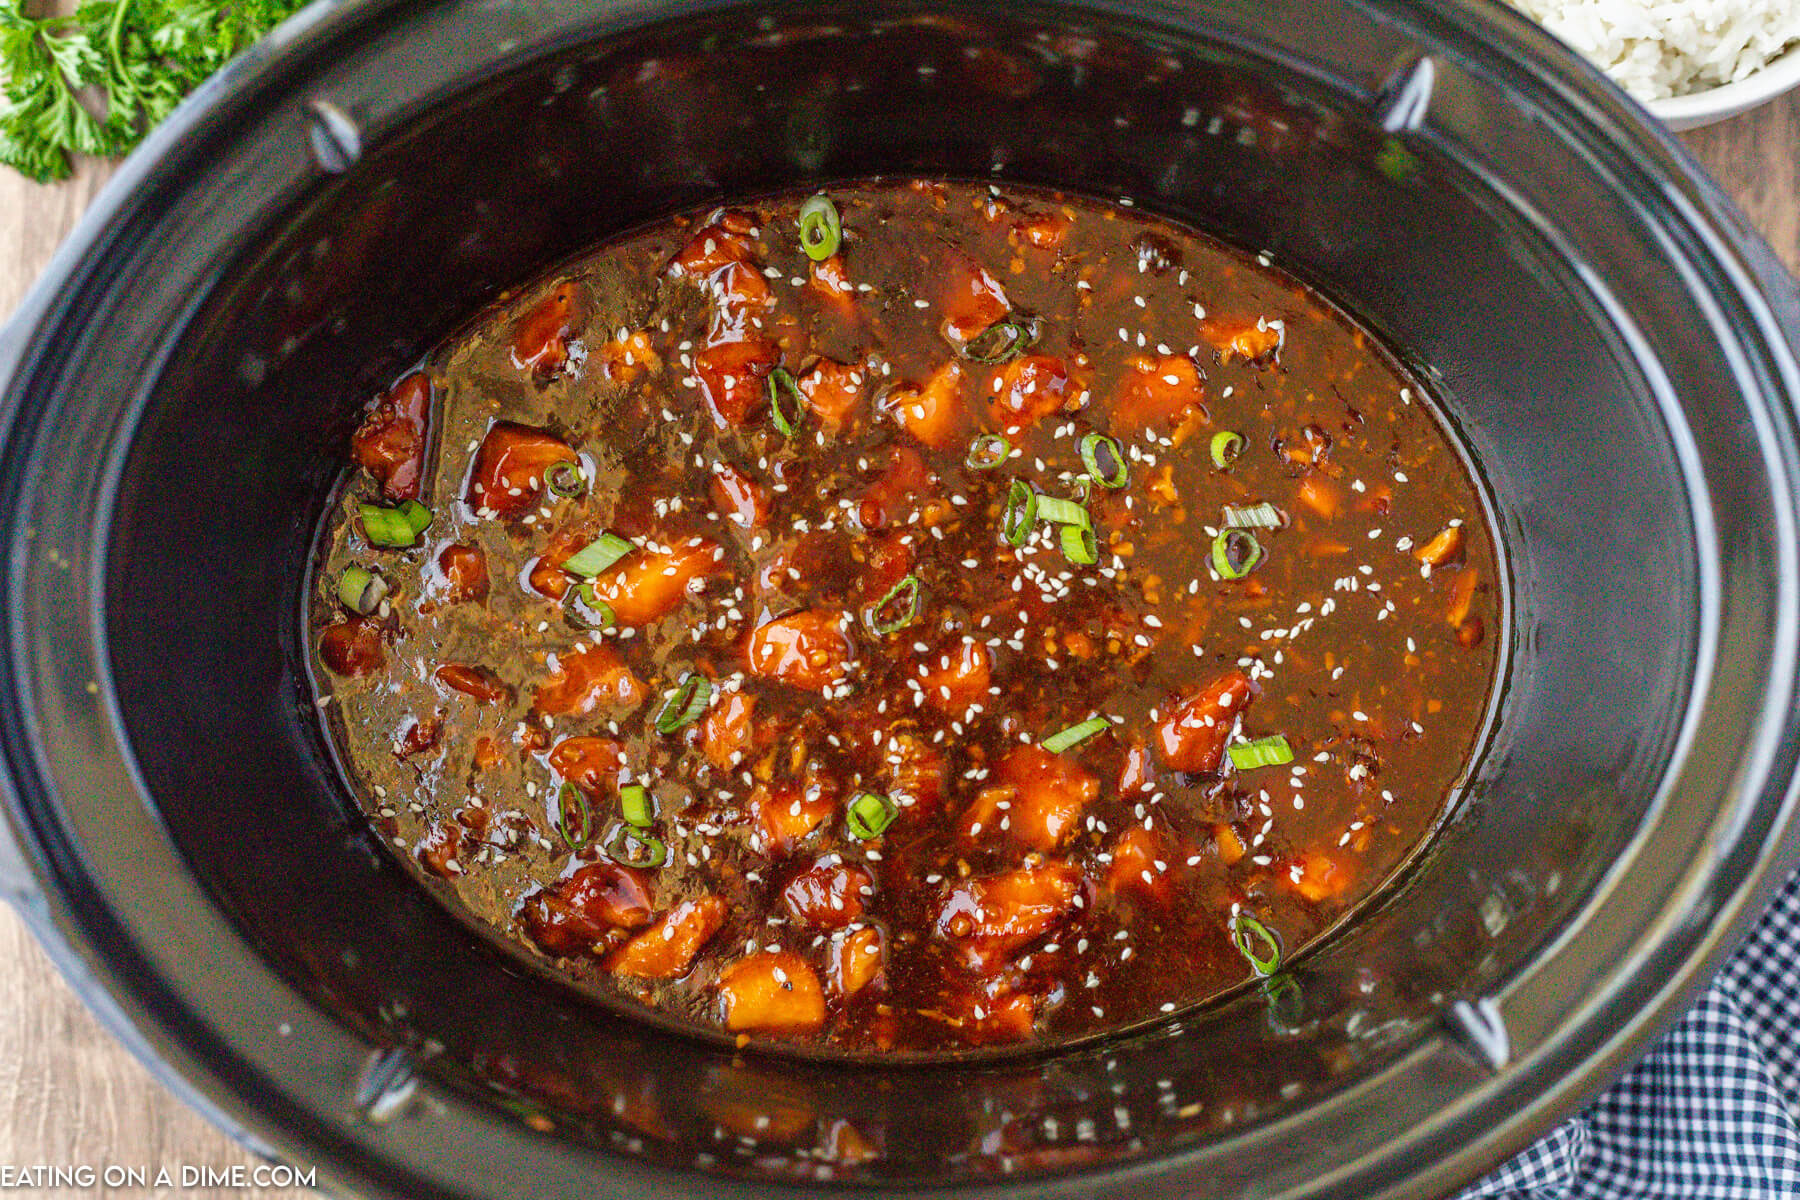 Ornge Chicken in the slow cooker